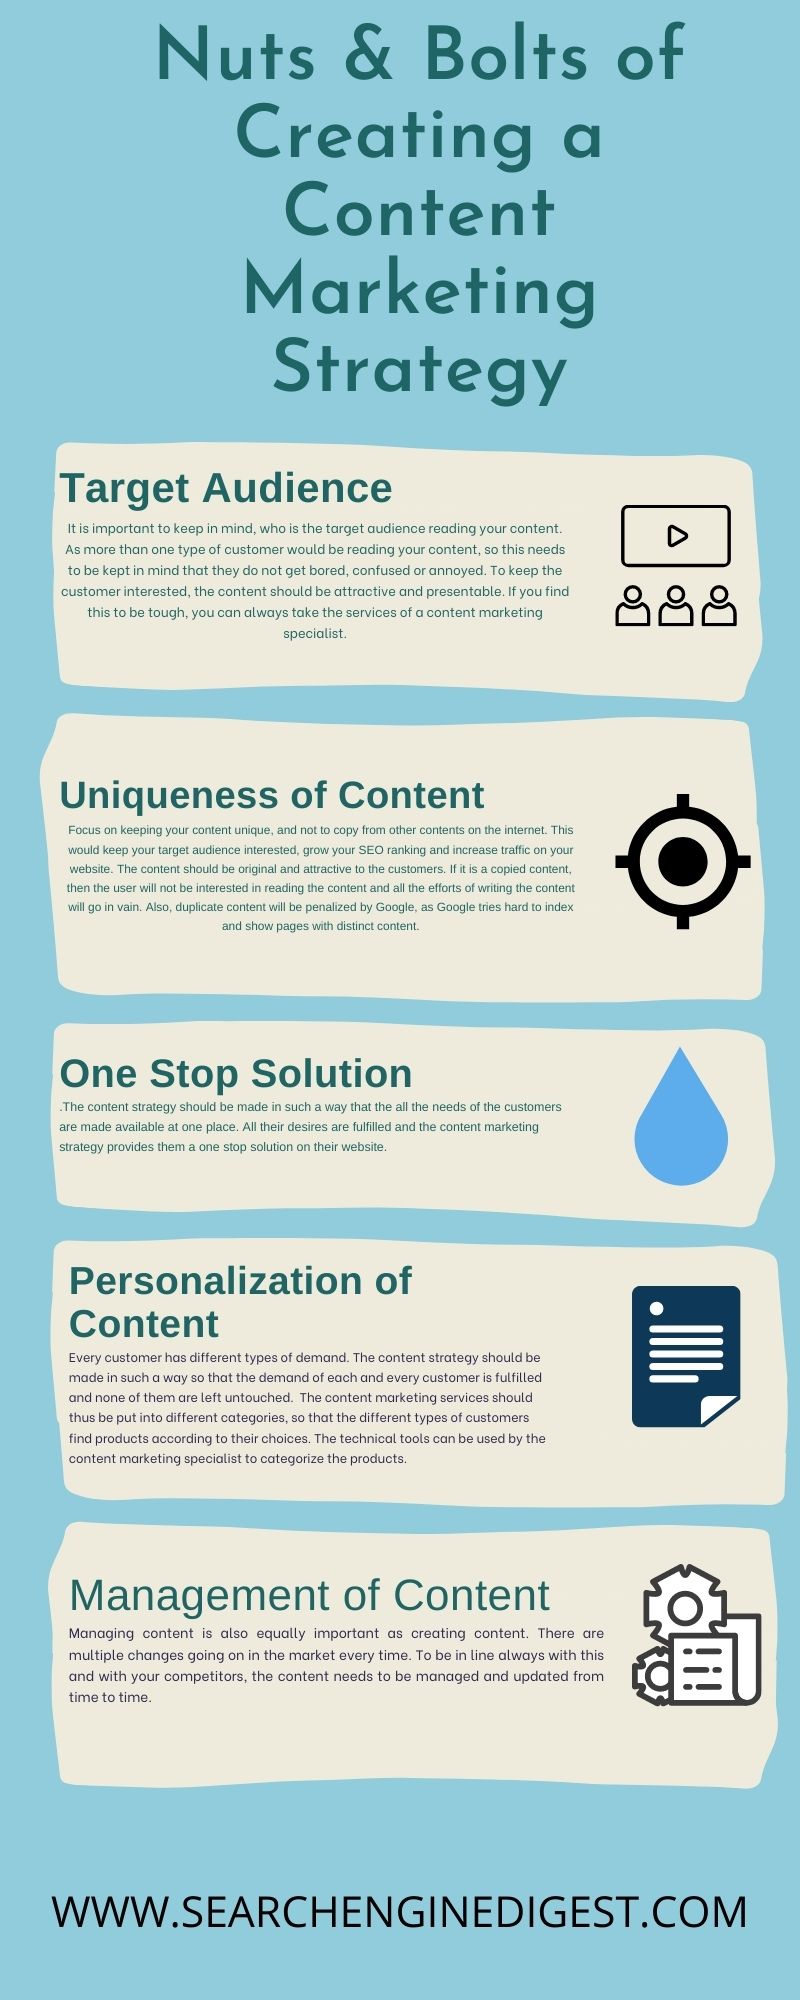 Pointers to become a good content specialist